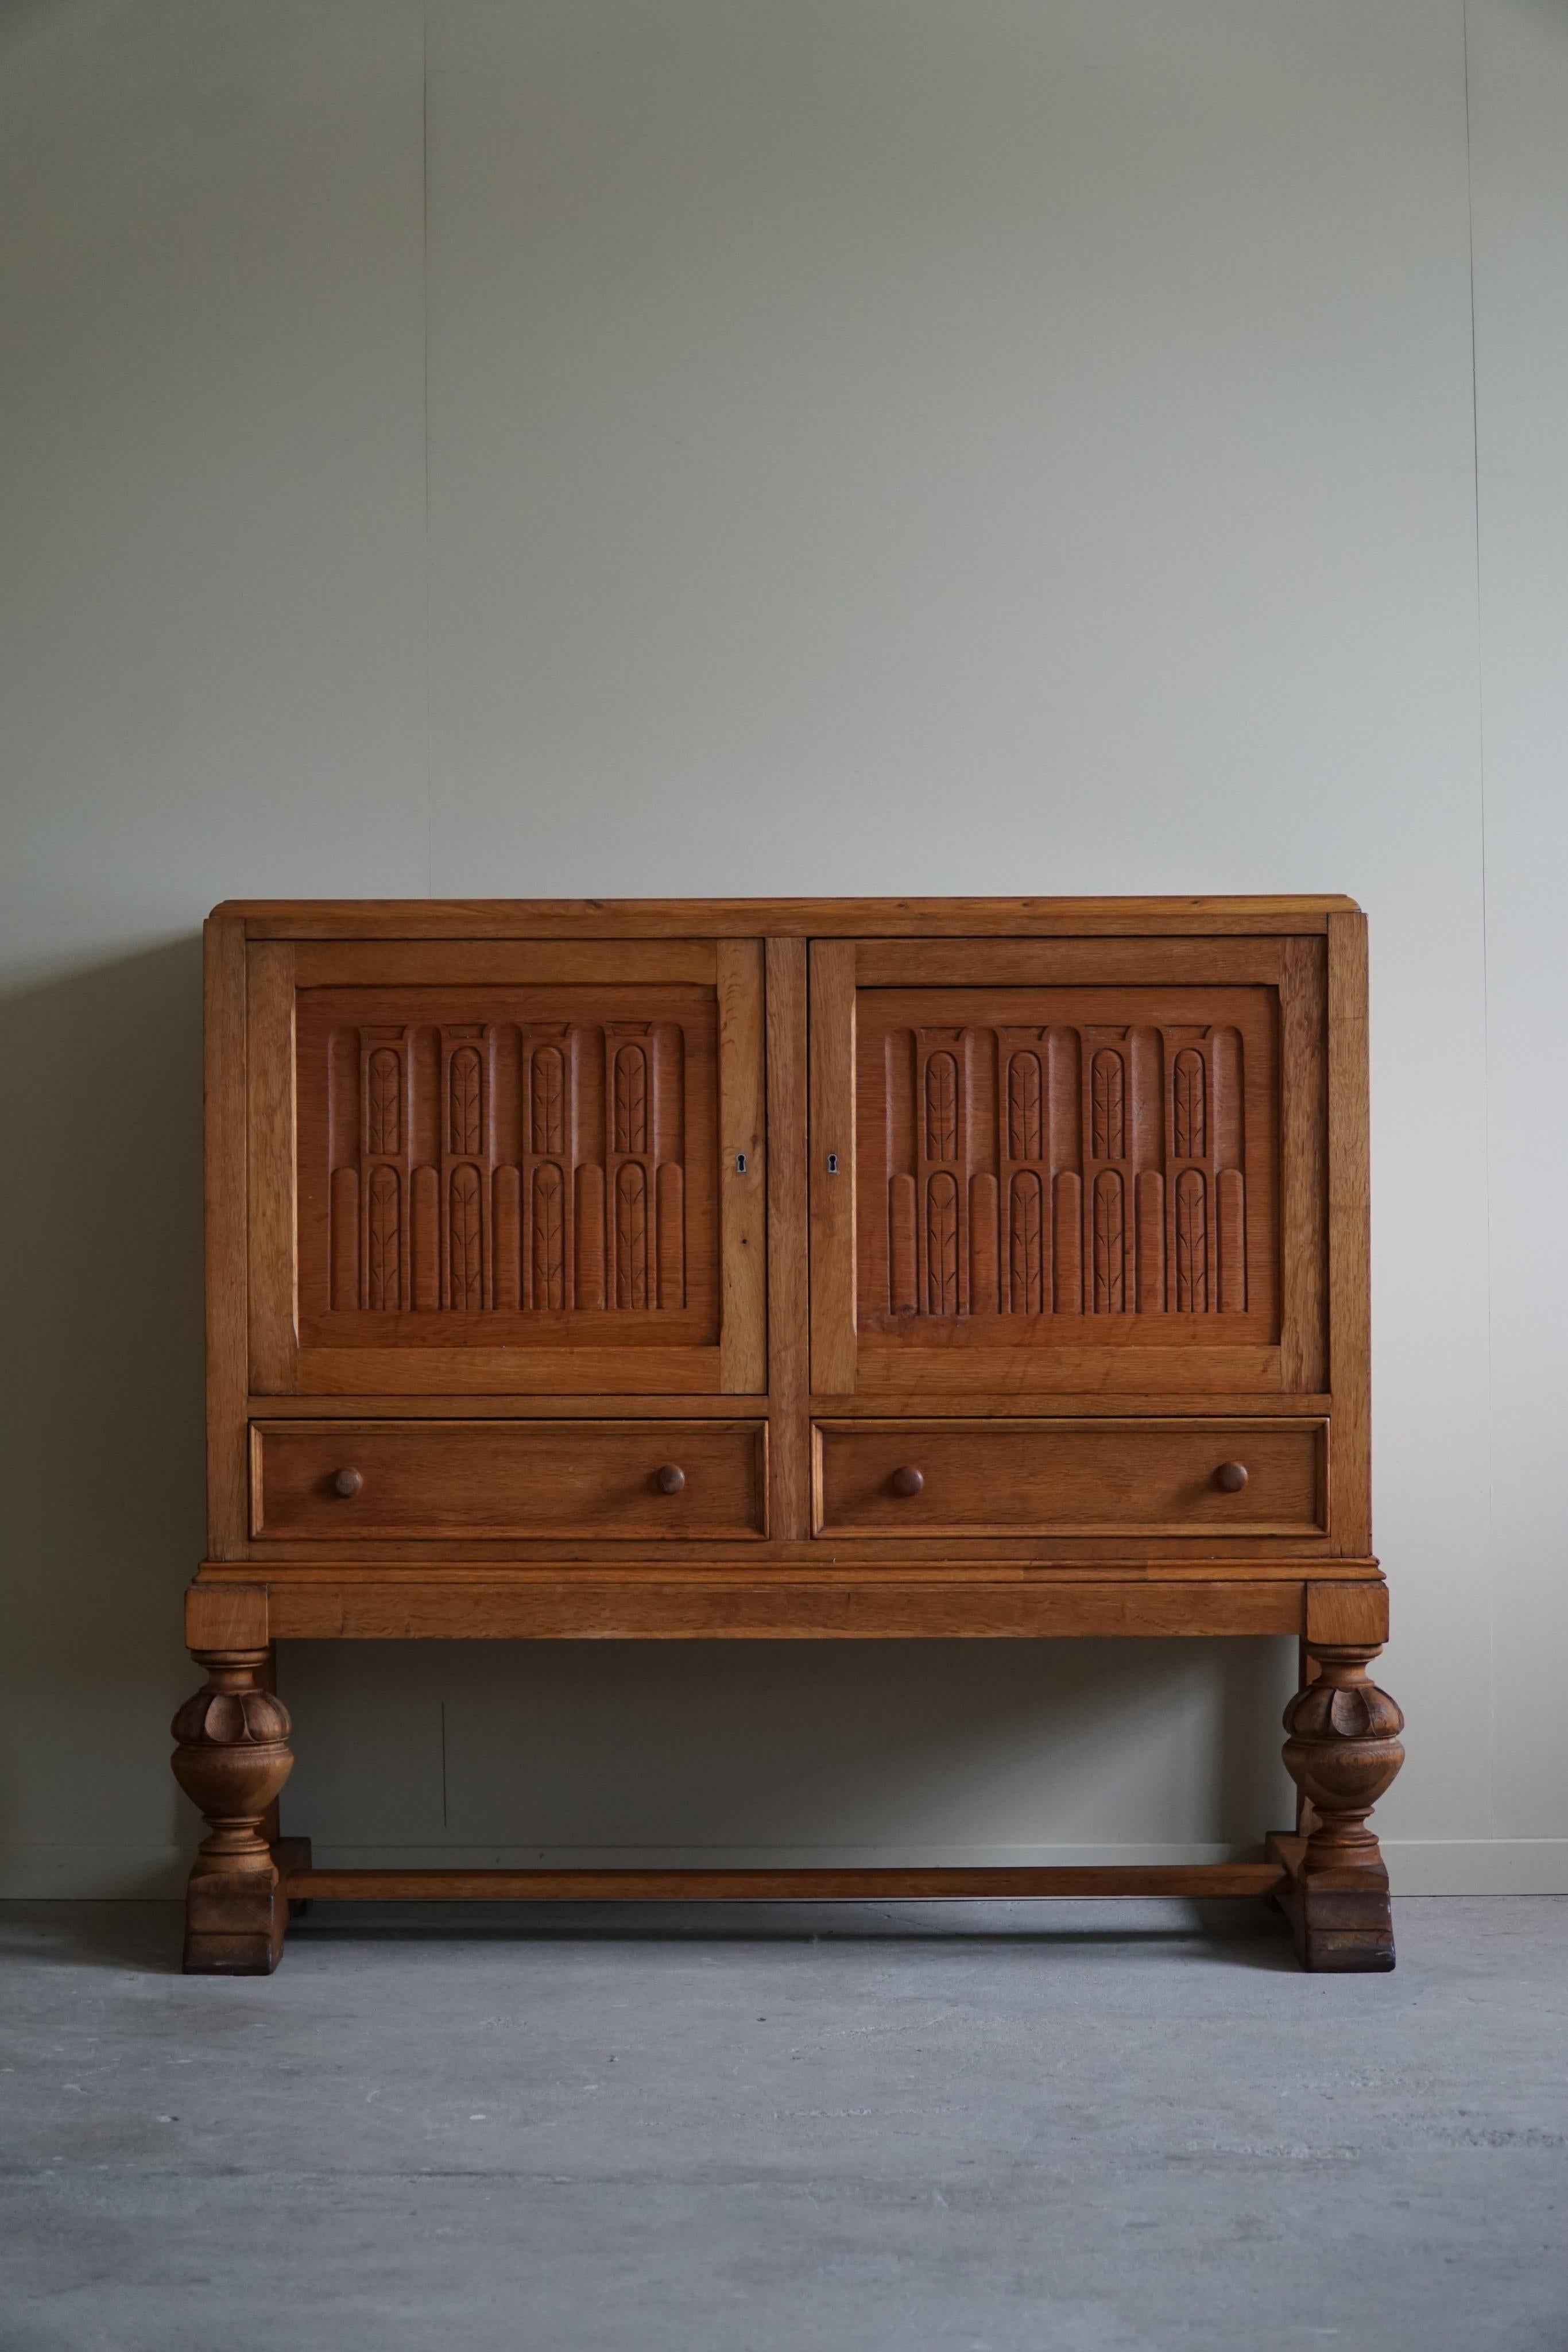 This exquisite handcrafted cabinet was born from the skilled hands of a Danish carpenter during the mid-20th century, precisely in the 1950s. Crafted with meticulous attention to detail and a deep appreciation for the beauty of natural materials,